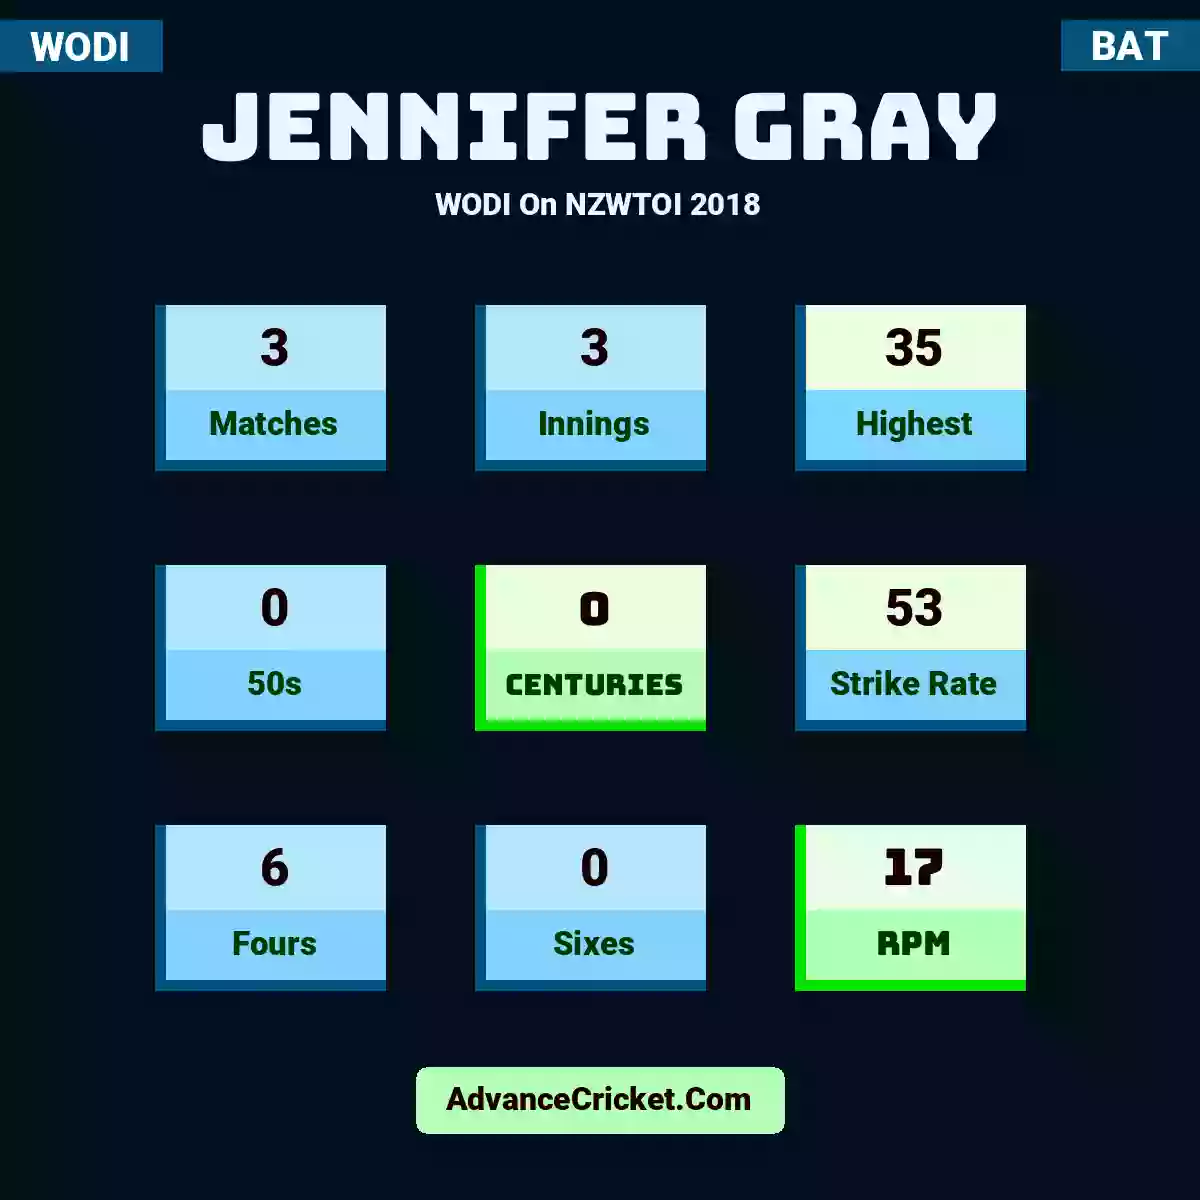 Jennifer Gray WODI  On NZWTOI 2018, Jennifer Gray played 3 matches, scored 35 runs as highest, 0 half-centuries, and 0 centuries, with a strike rate of 53. J.Gray hit 6 fours and 0 sixes, with an RPM of 17.